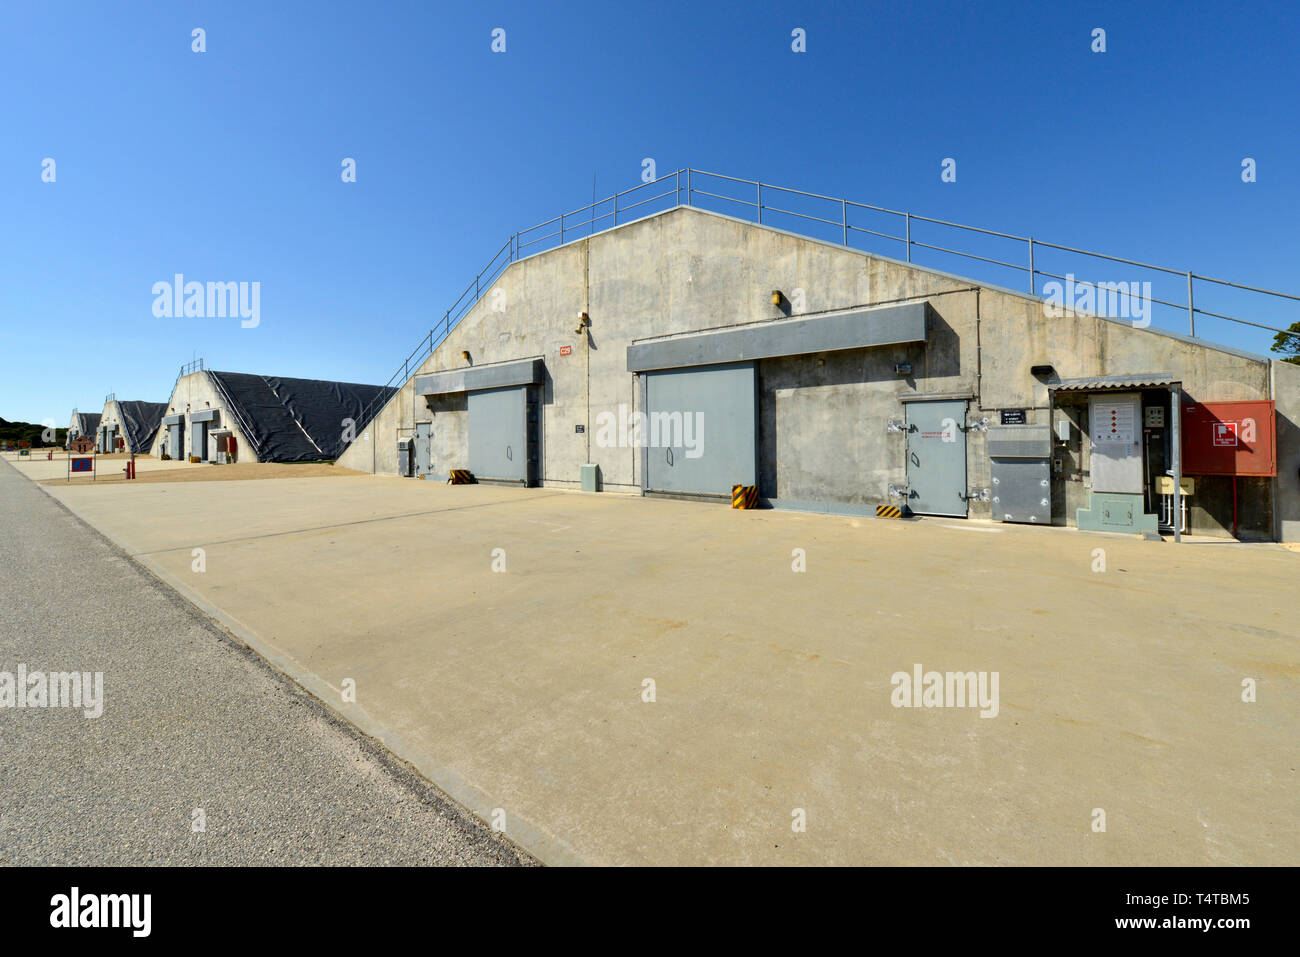 A naval concrete weapons storage bunker at a naval base housing artillery shells, missiles and torpedos. Stock Photo